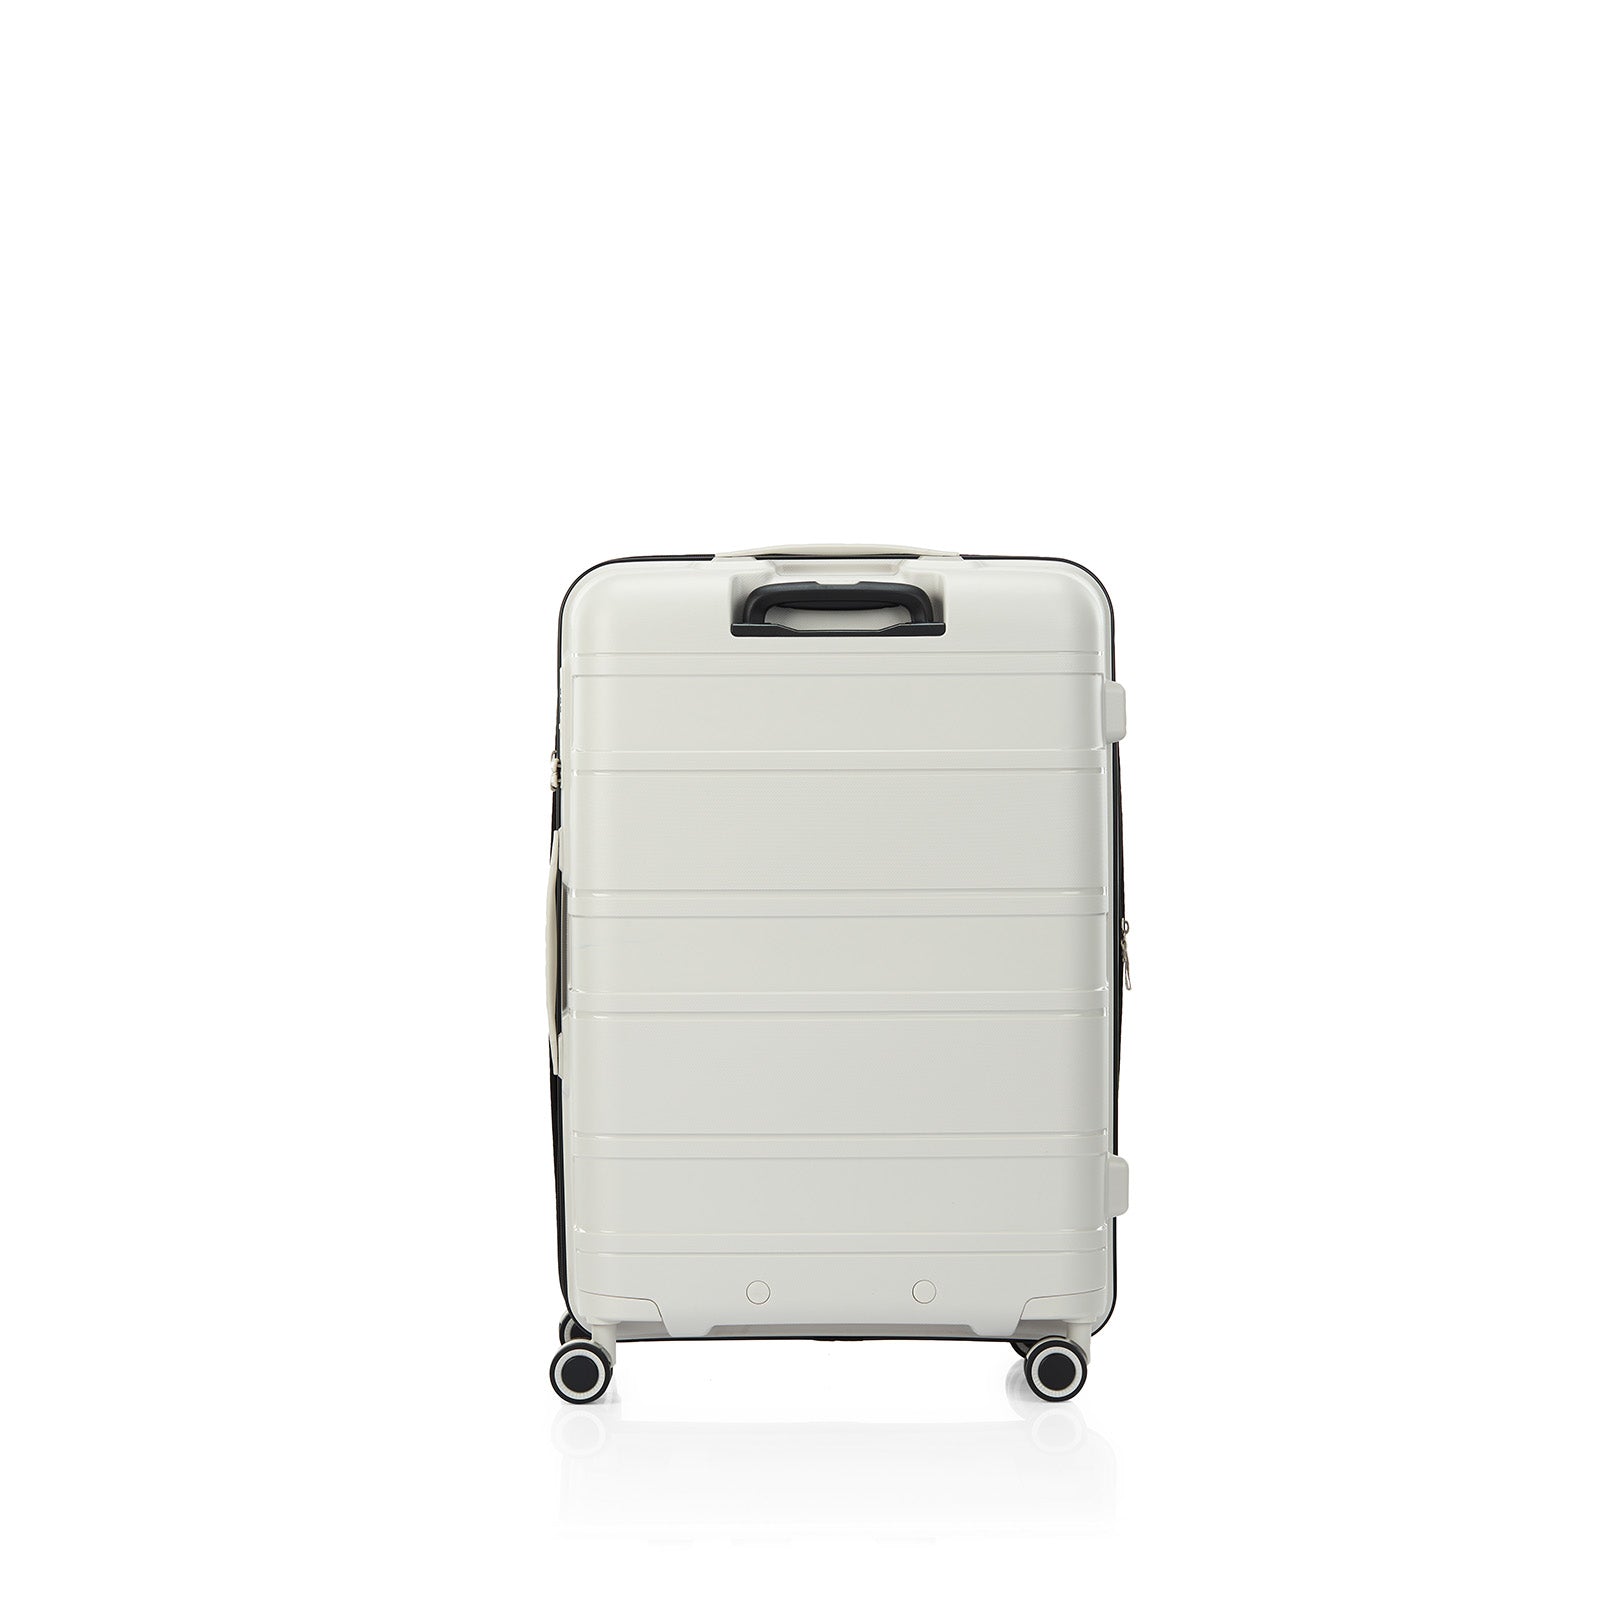 American-Tourister-Light-Max-69cm-Suitcase-Off-White-Back